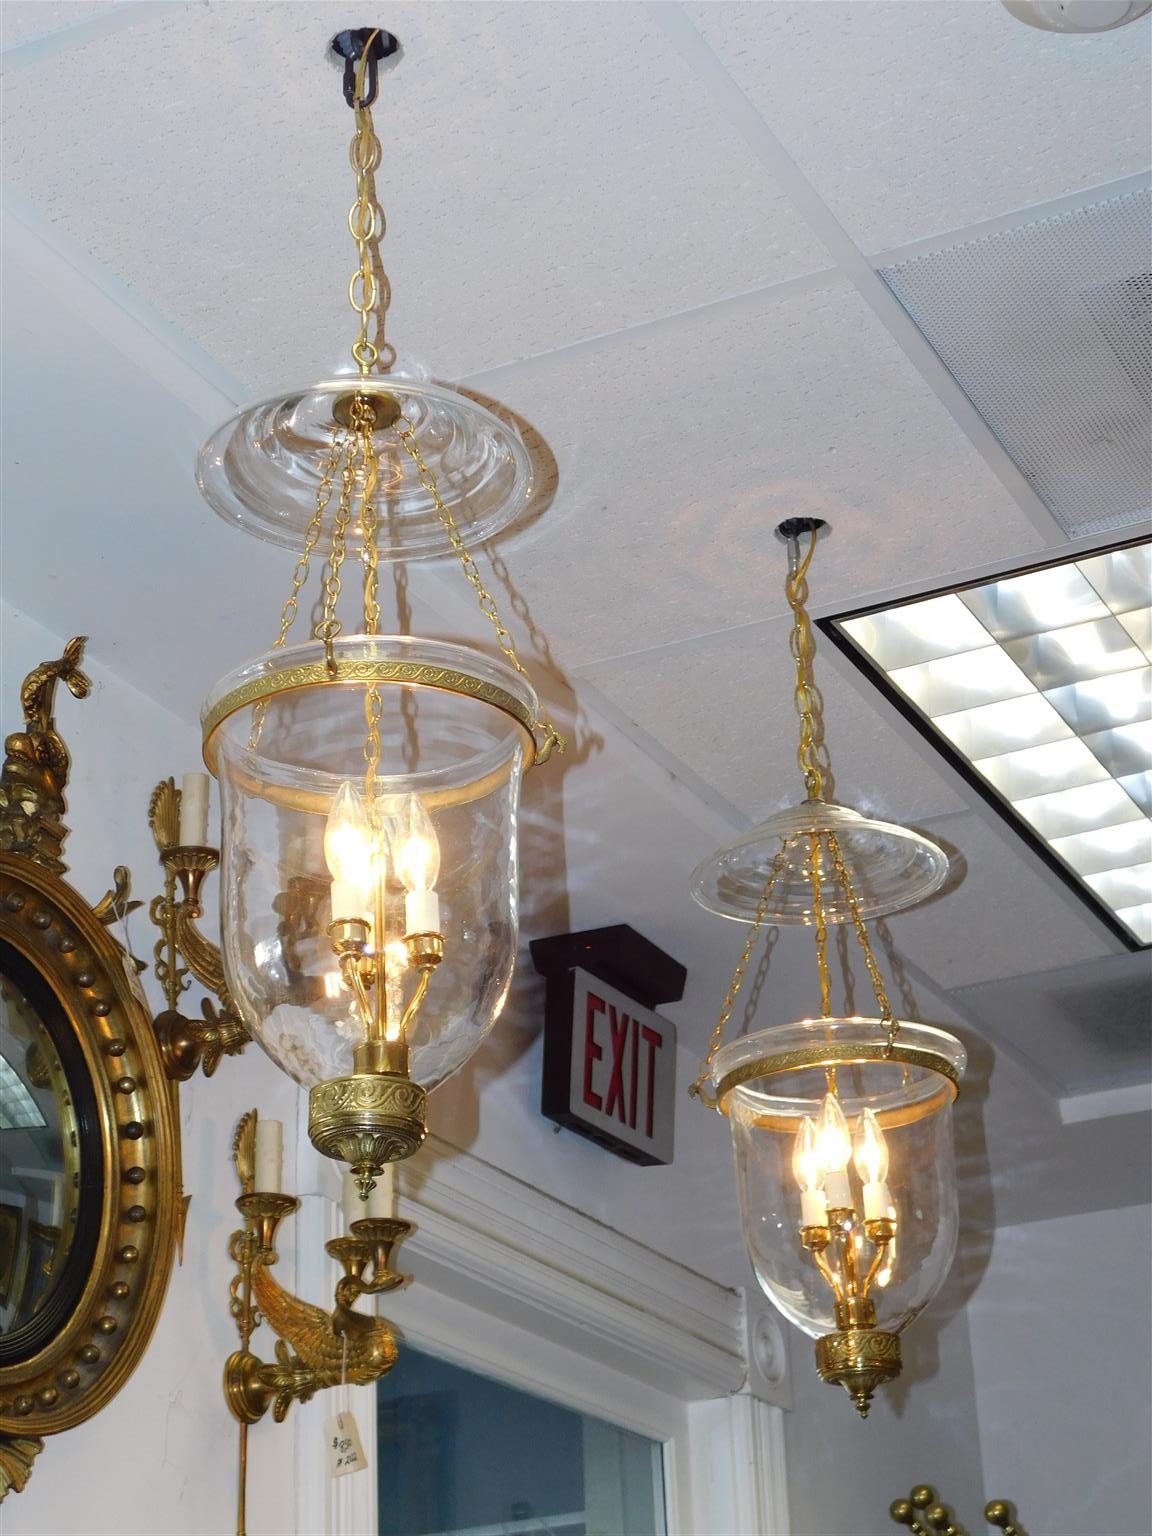 Pair of American brass and bell jar hanging glass foliage lanterns, Late 19th Century. Pair have a three light interior cluster.